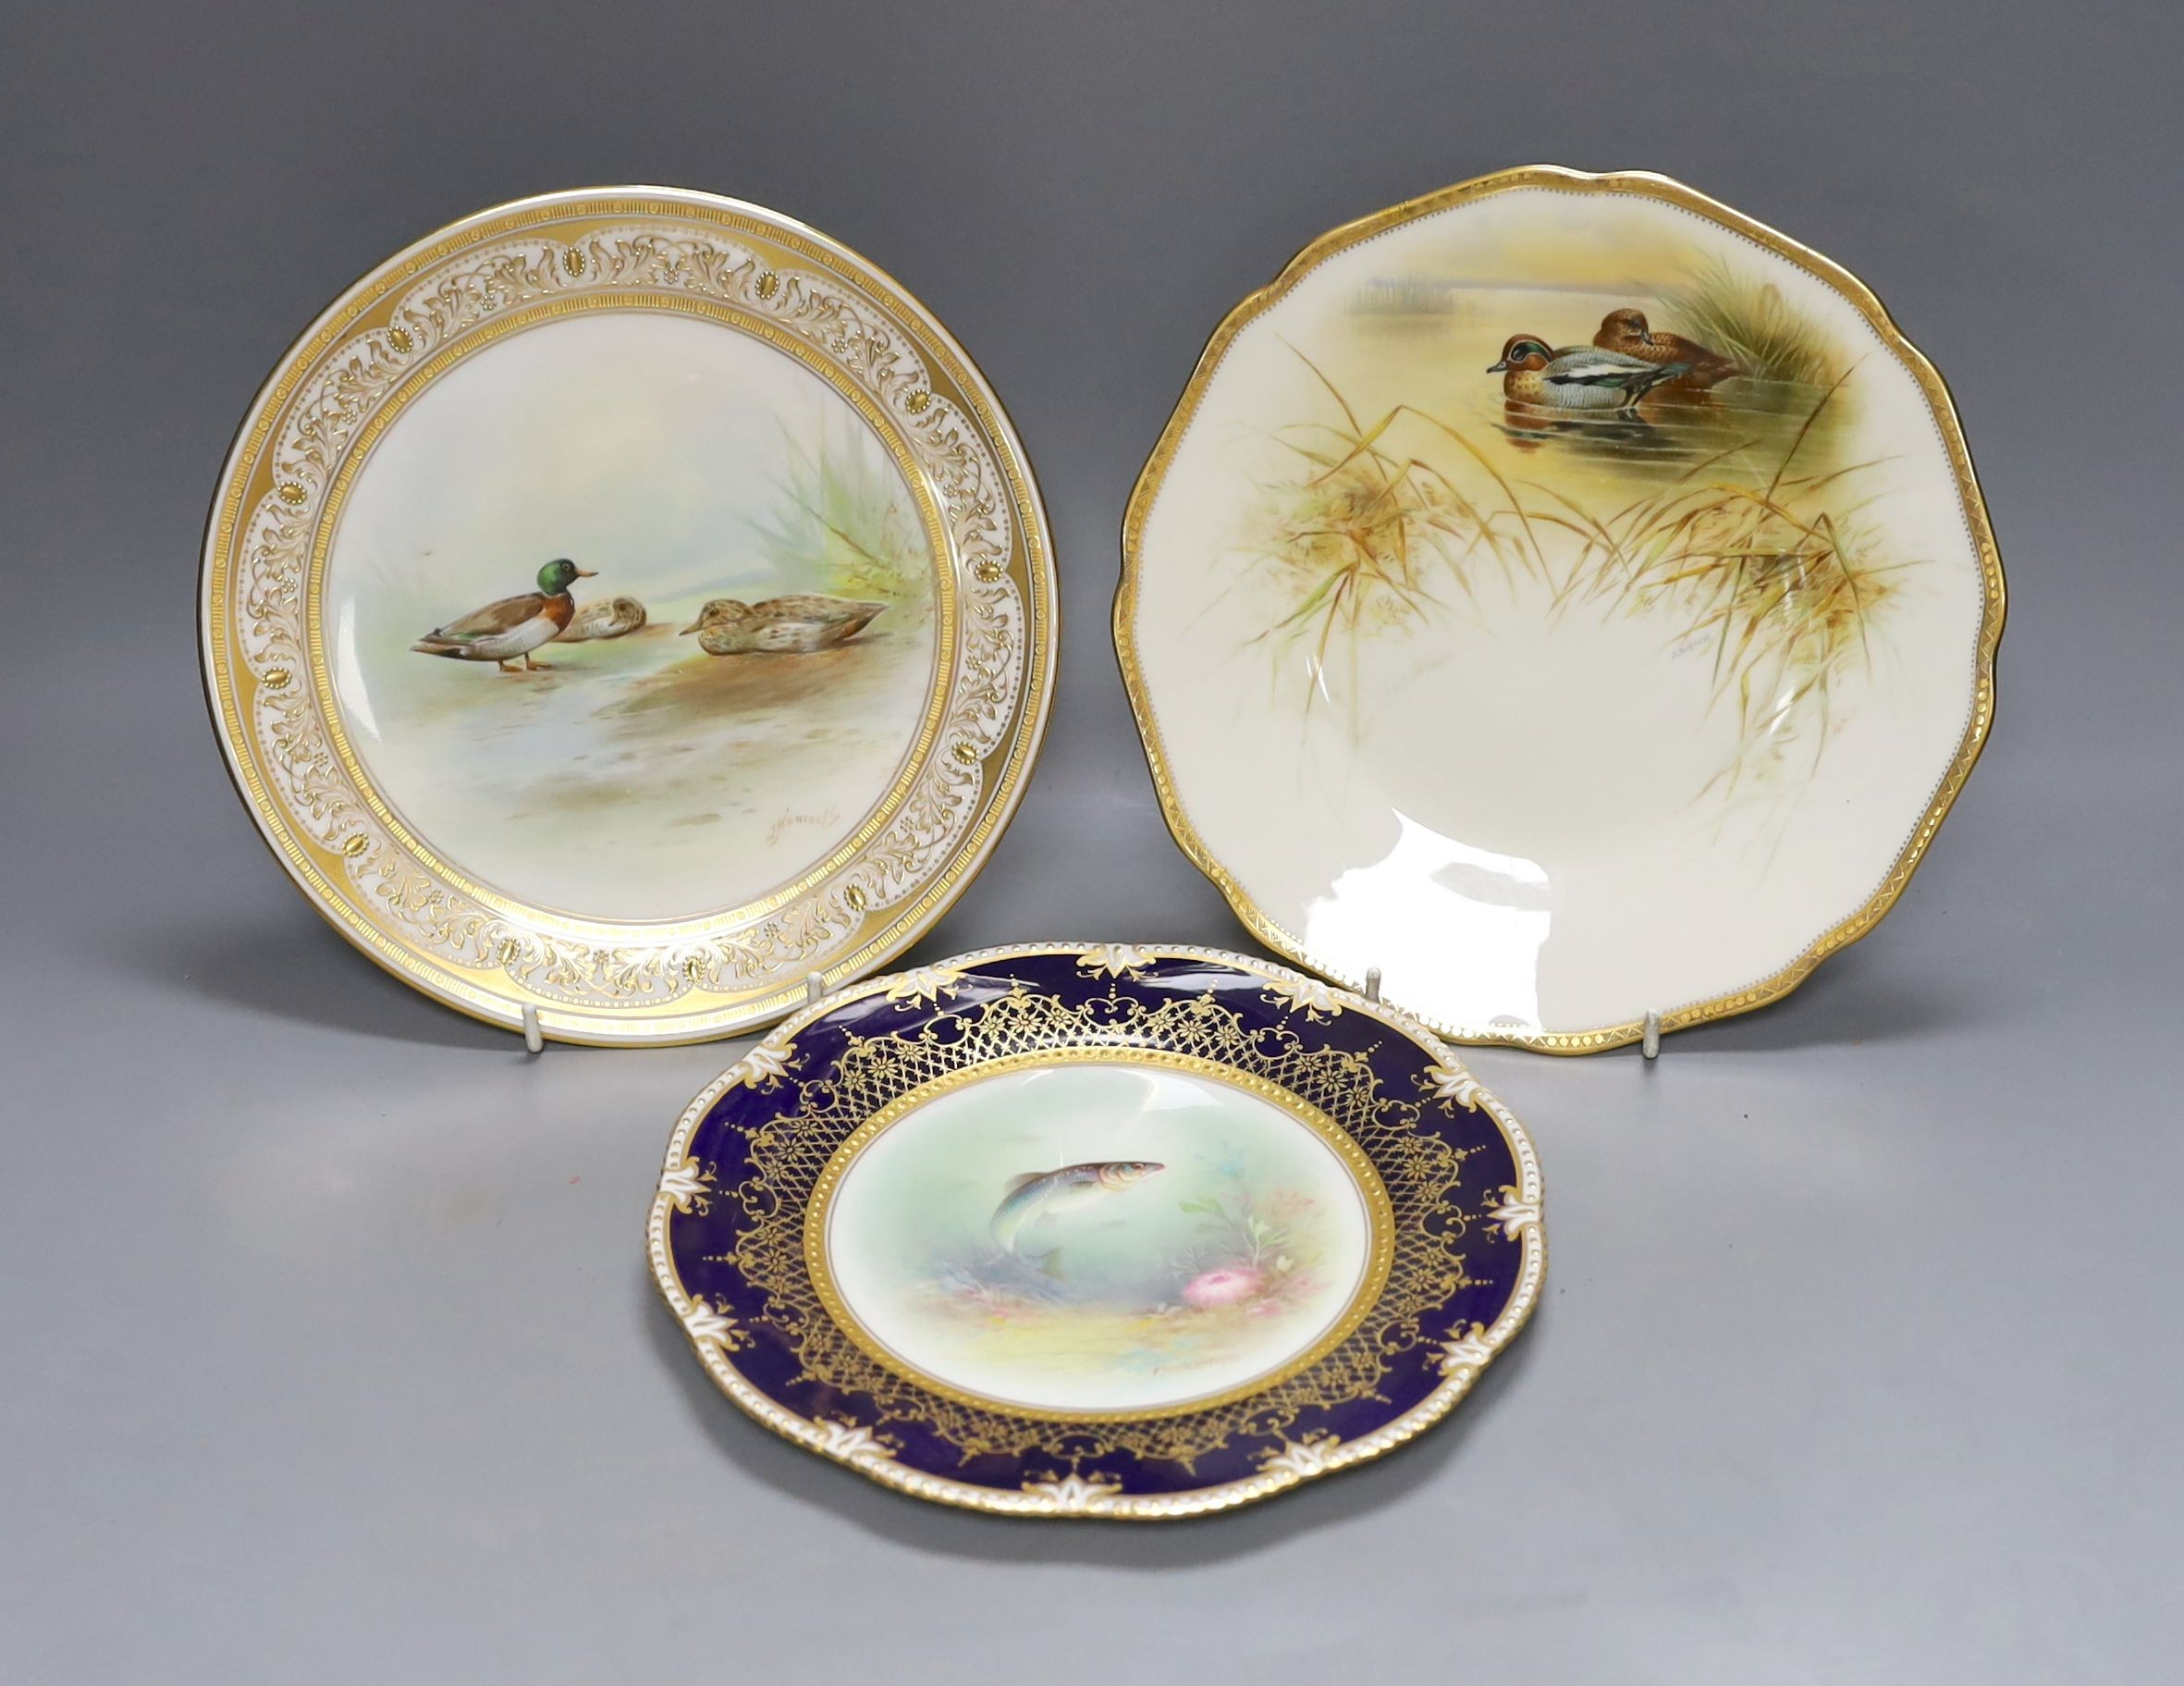 An Aynsley fish painted plate by S Micklewright, A Royal Doulton mallard or wild duck painted cabinet plate by J. Hancock and a Cauldon duck painted plate by D. Birkbeck (3)